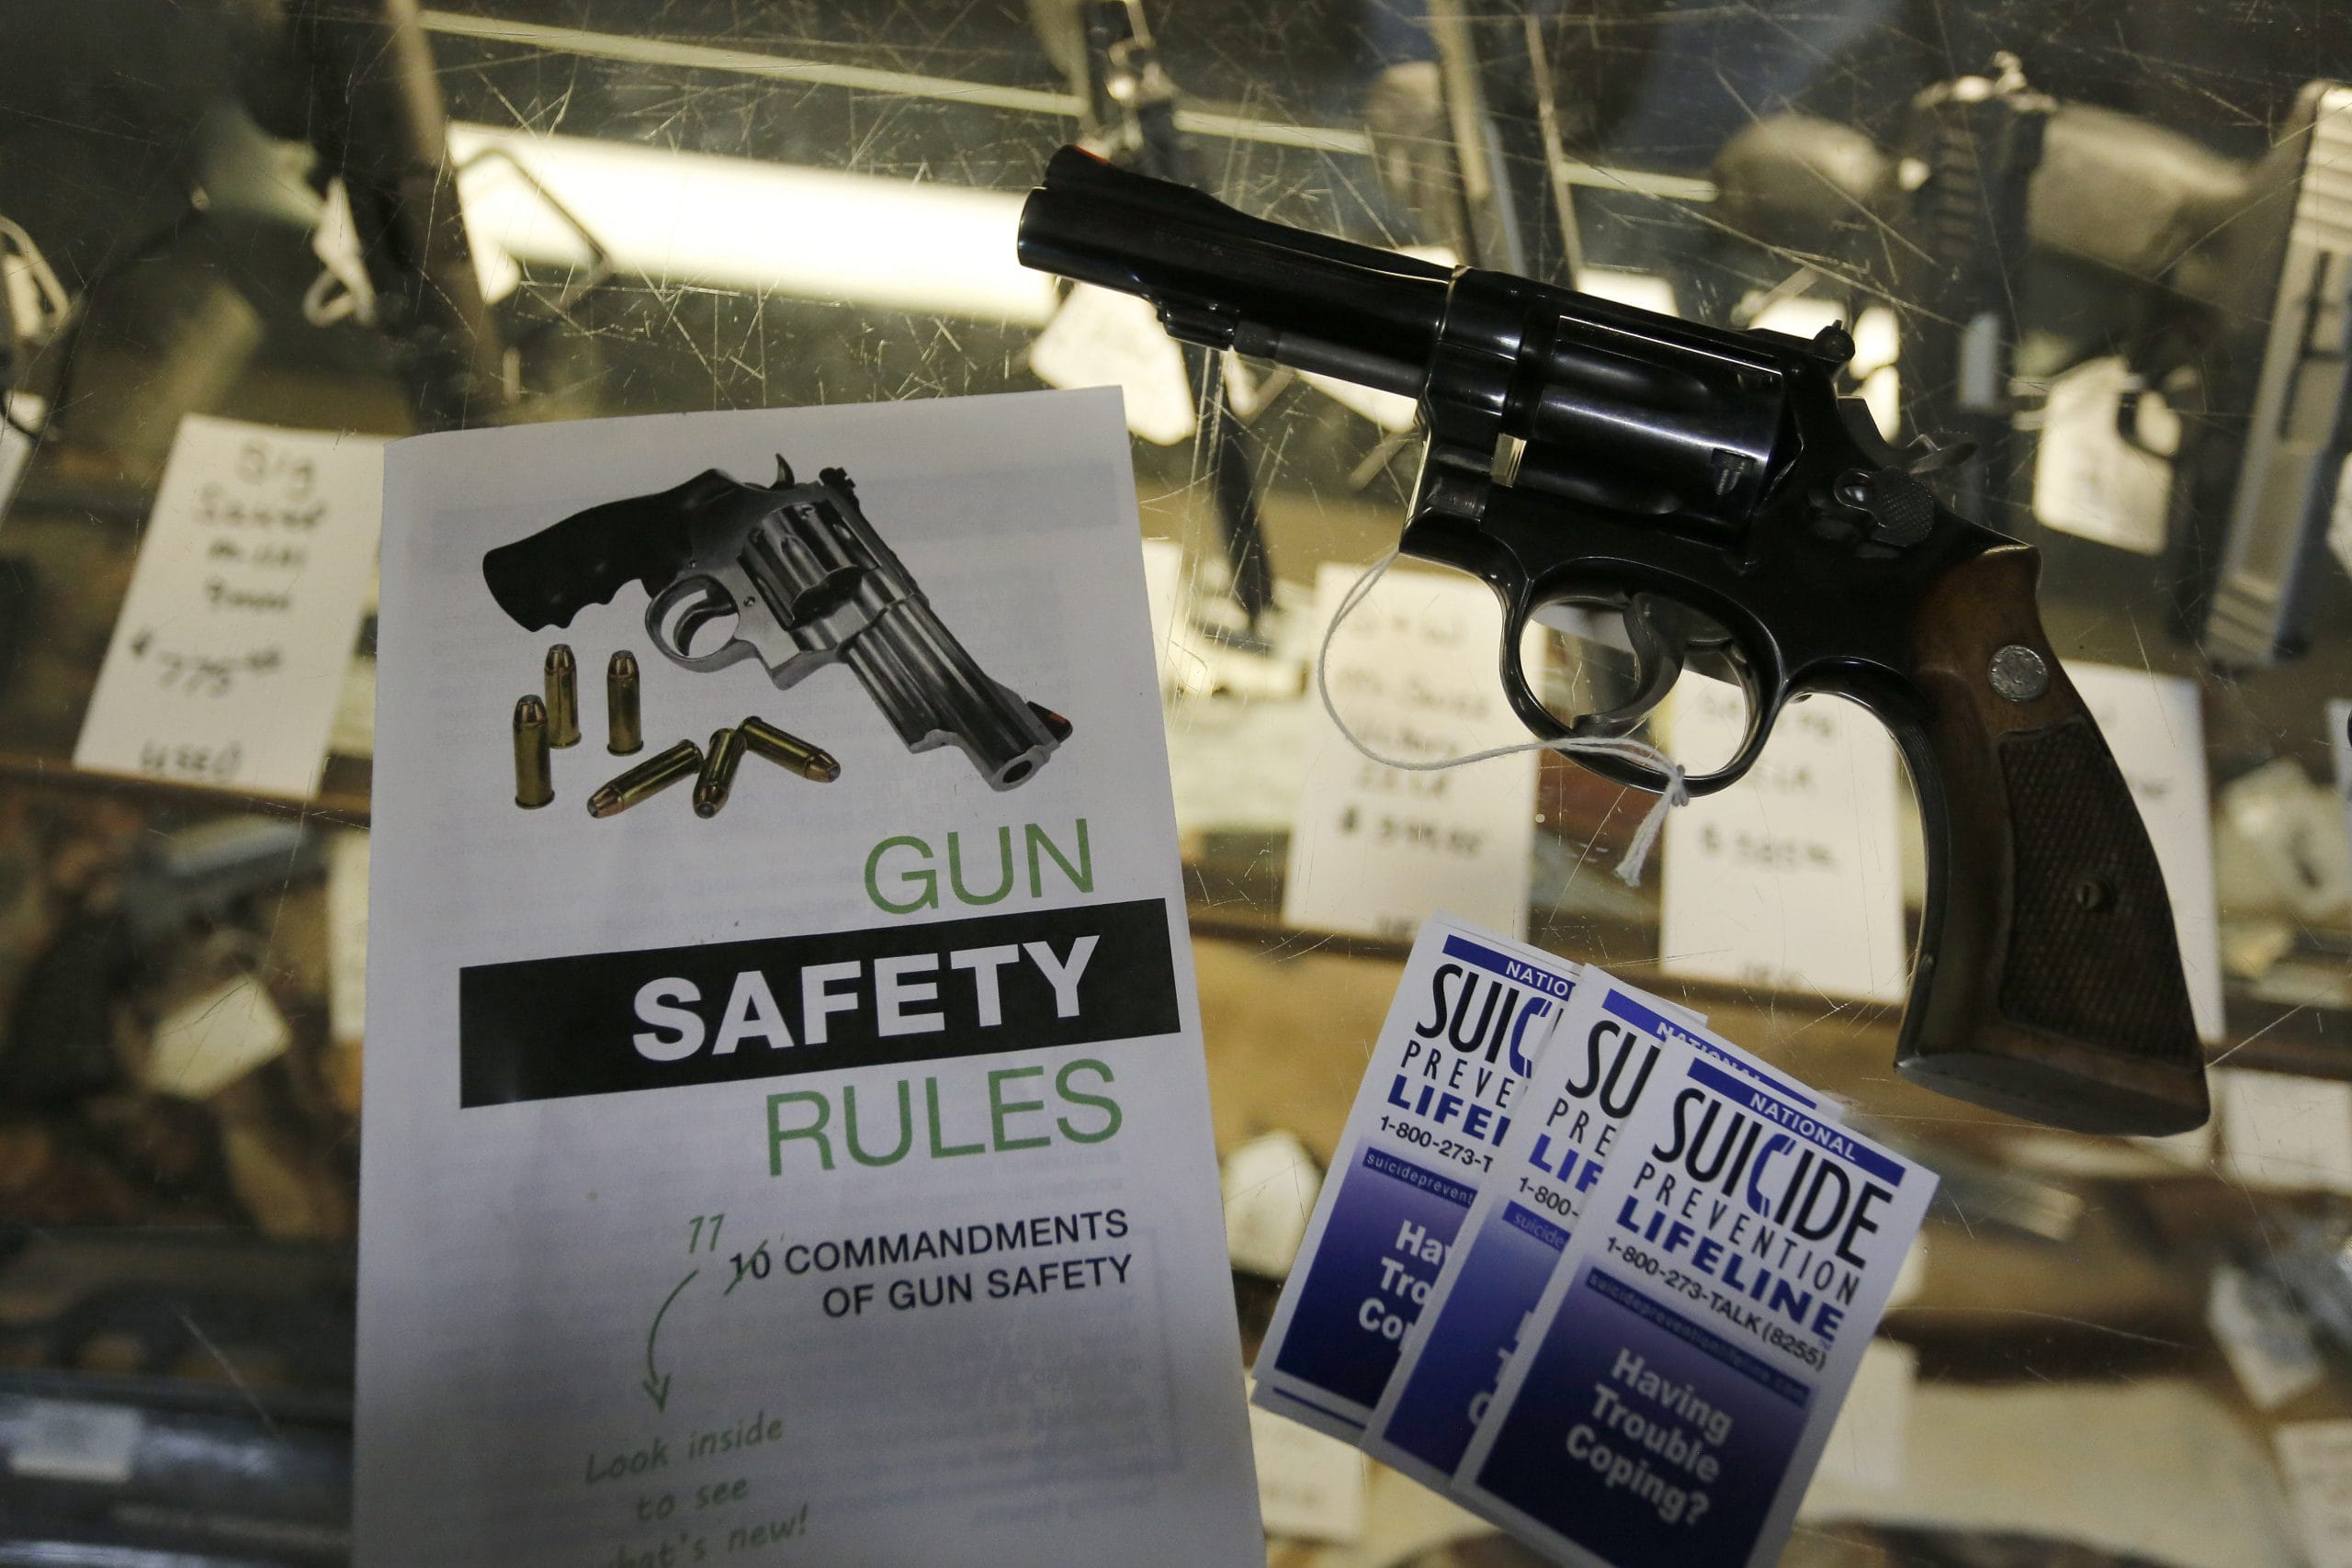 How Did We Not Know?' Gun Owners Confront a Suicide Epidemic - The